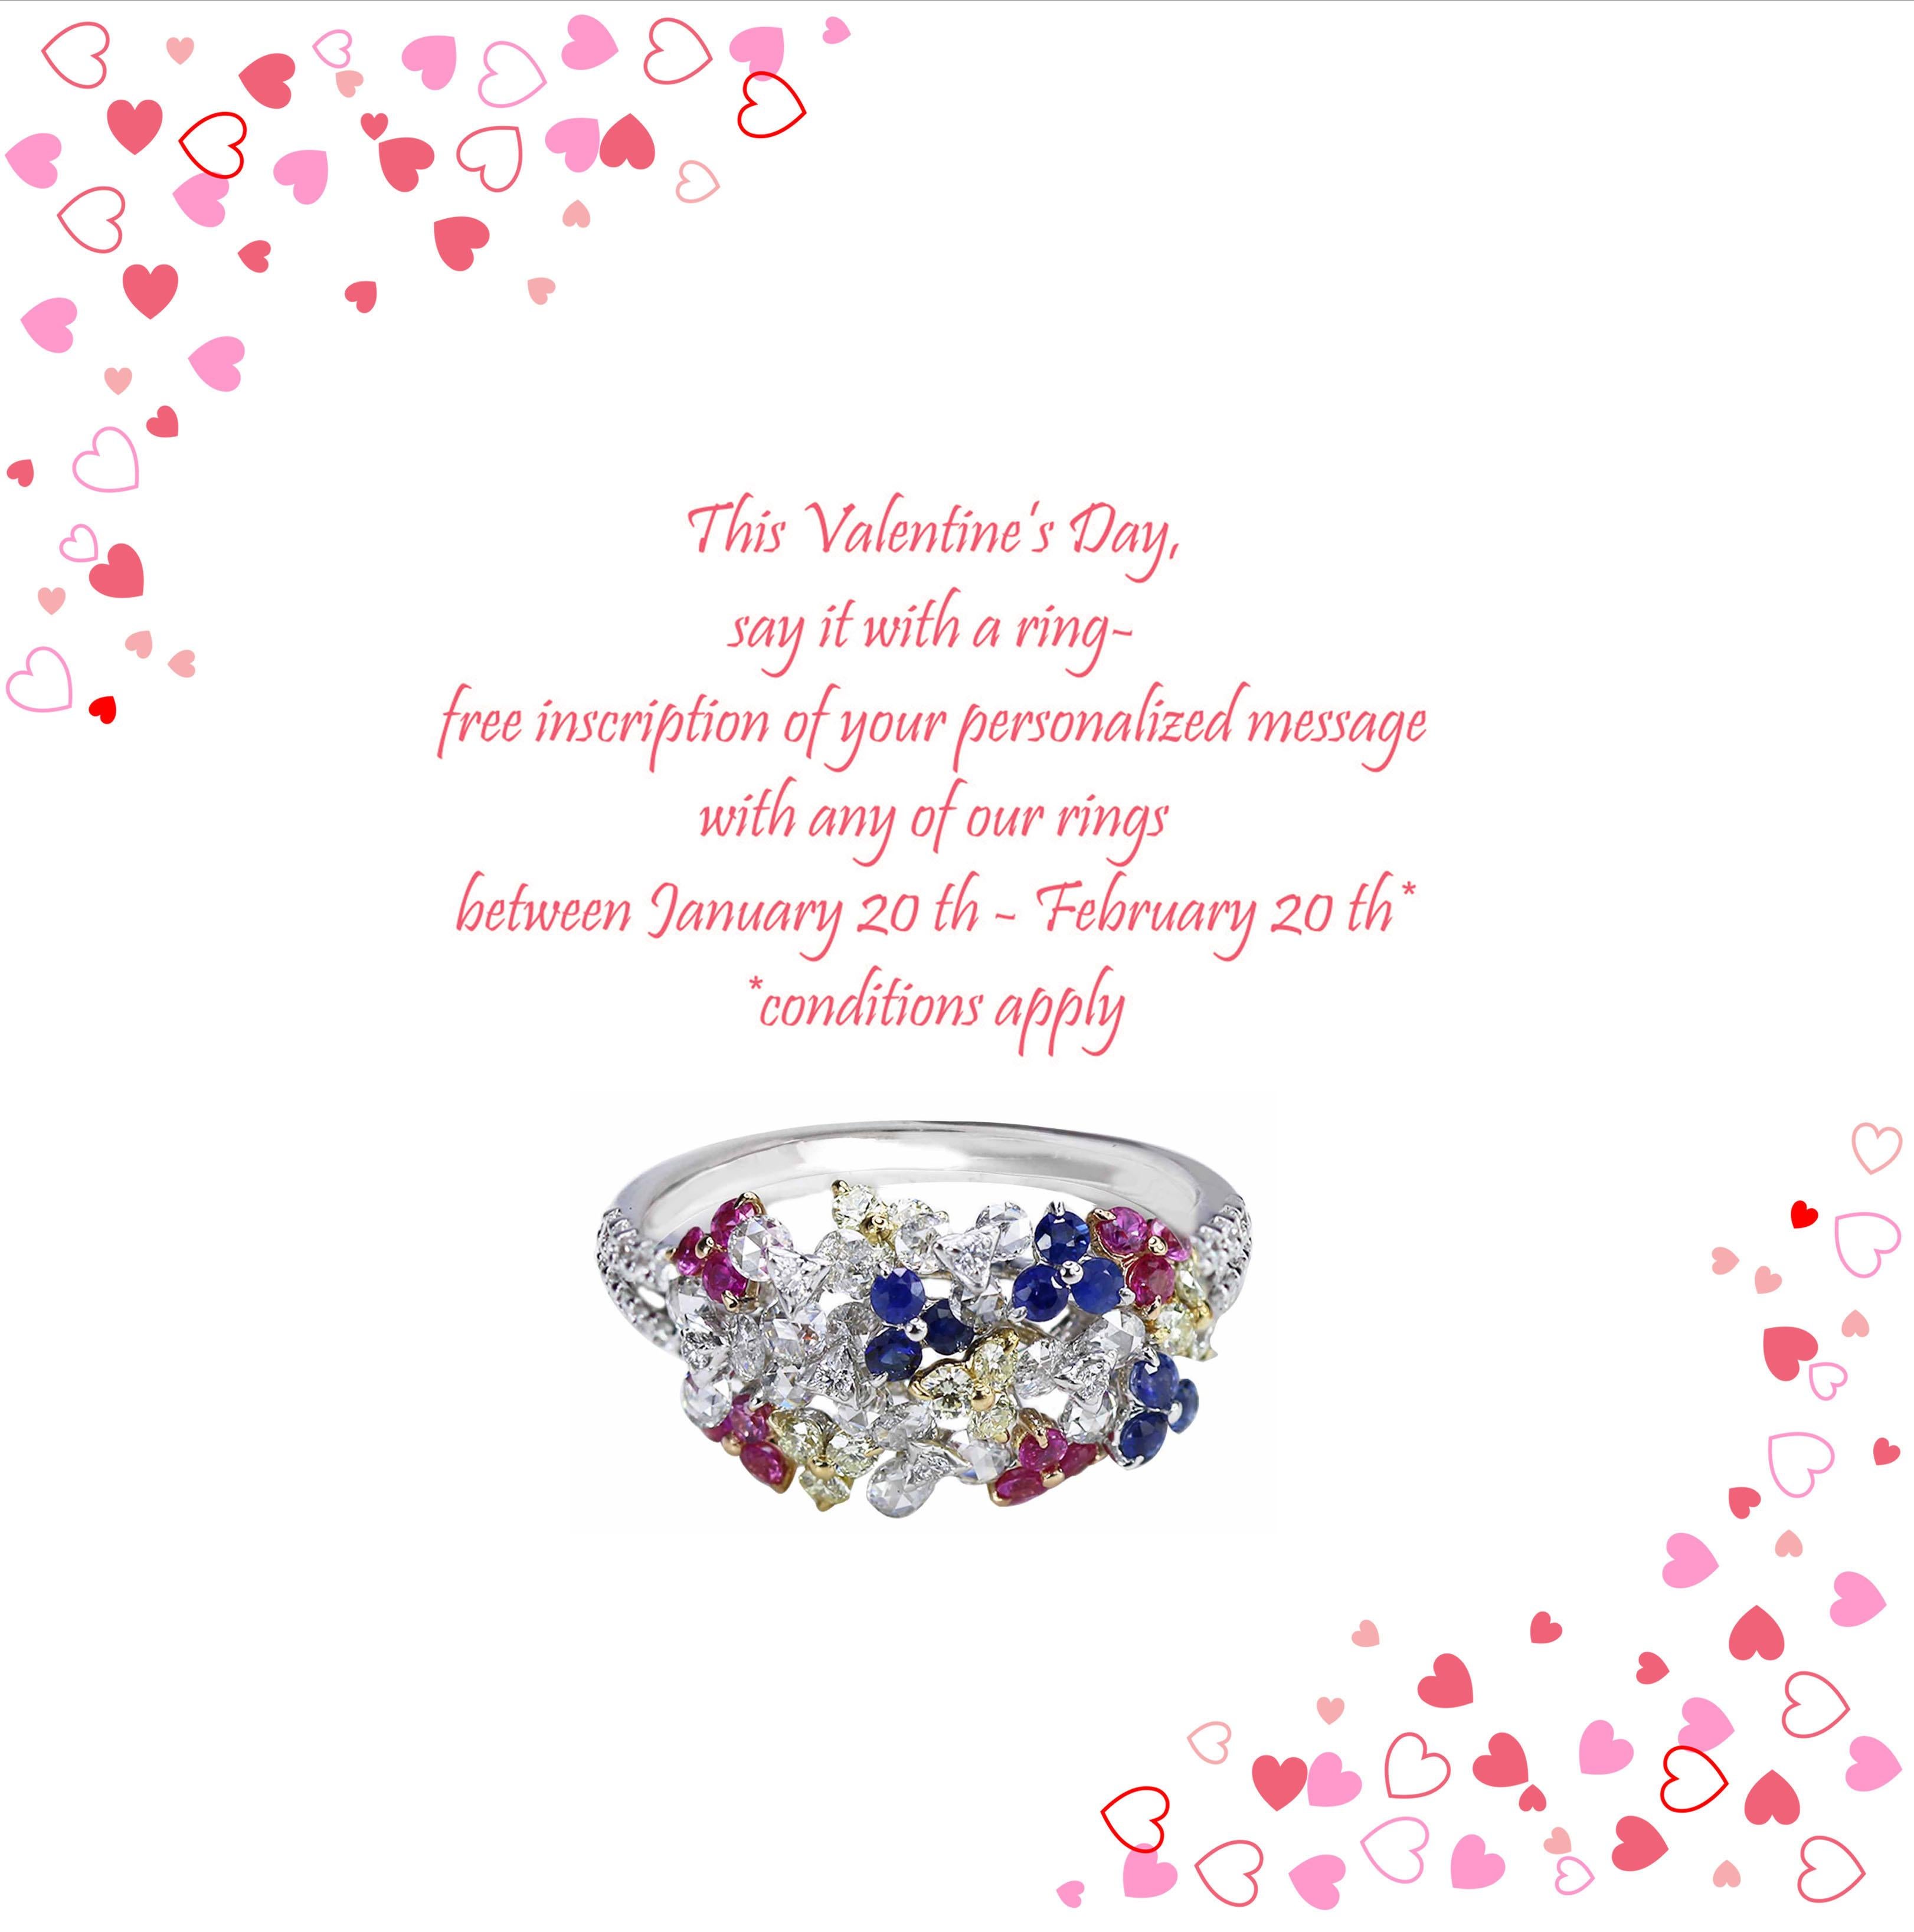 This Valentine’s Day, say it with a ring- free inscription of your personalized message with any of our rings between January 20 th - February 20 th* 

F-G/ VS White and yellow diamonds, and blue and pink sapphires ring

This vividly contemporary